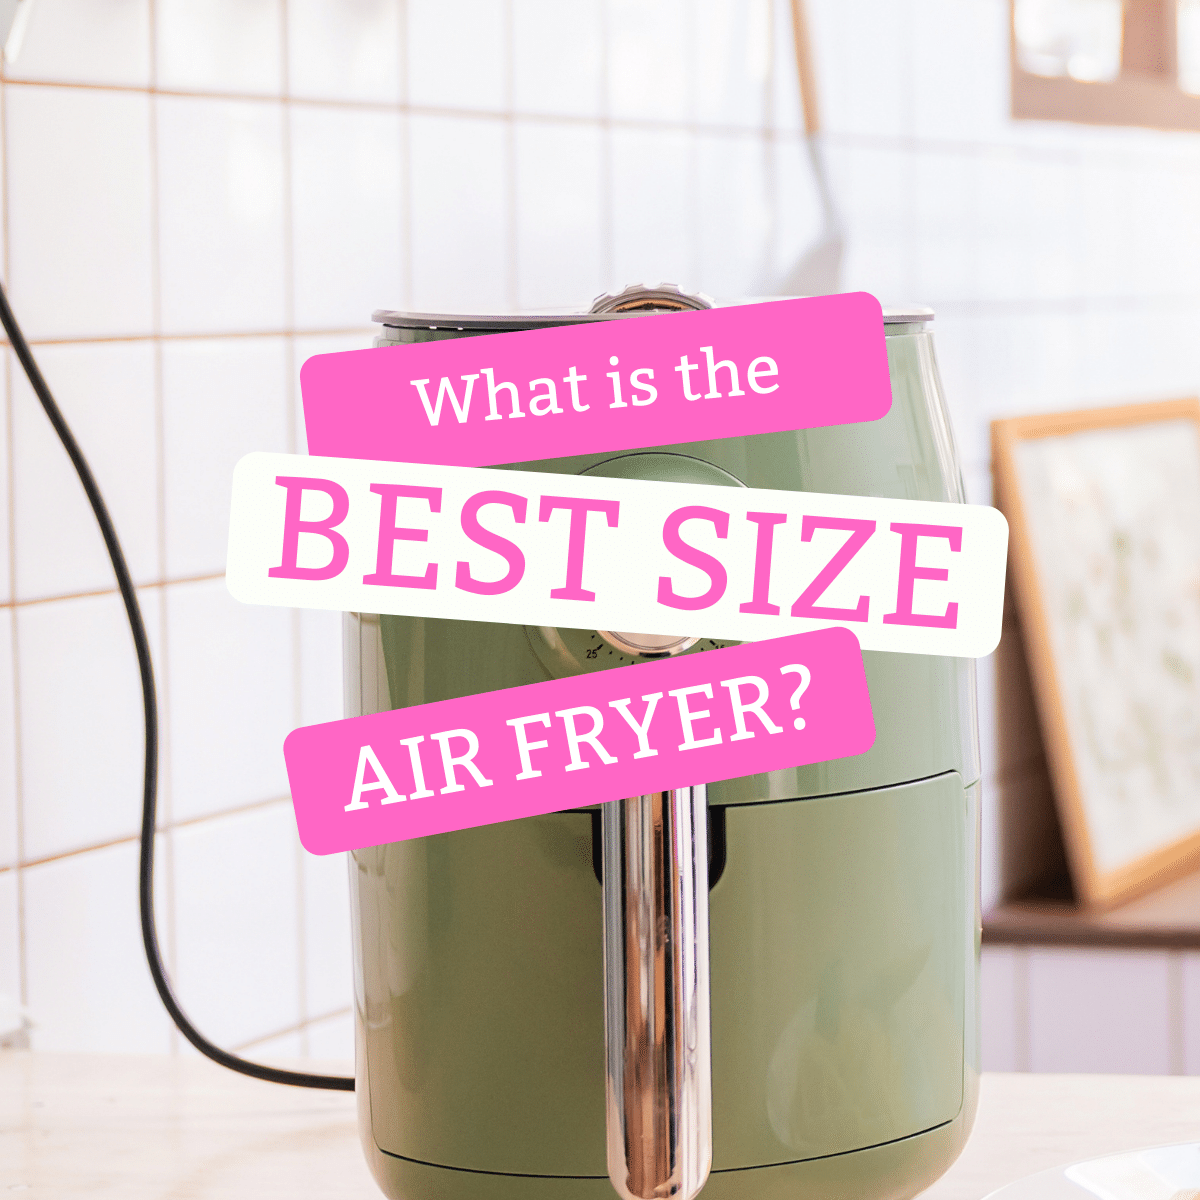 mint green air fryer on wooden counter, white tile backslpash with gray grout. Text overlay: what is the best size air fryer